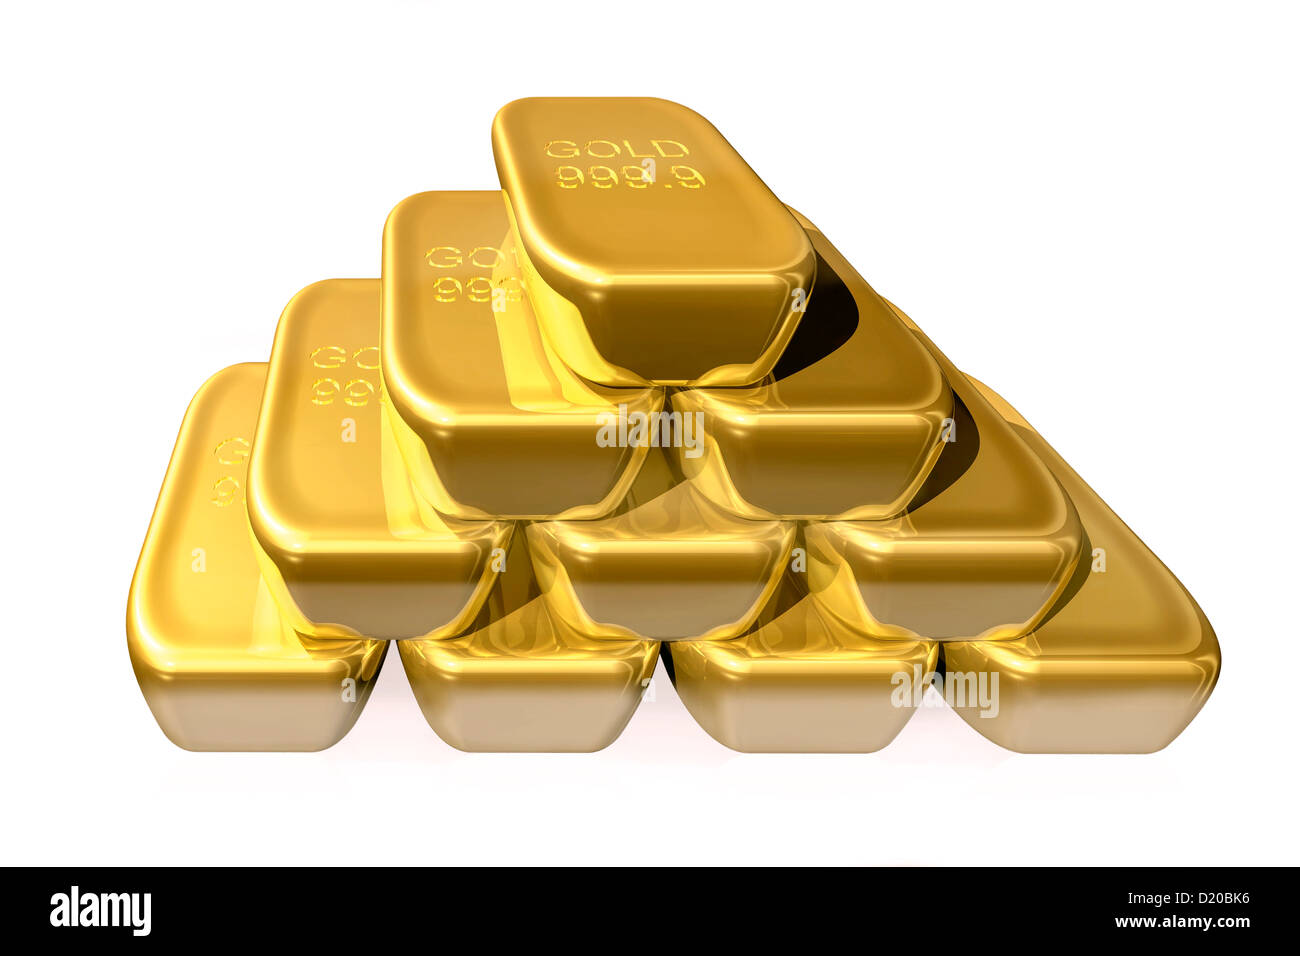 A pile, stack, heap, row, rows, of real fine pure bullion gold bars cut-out cut out cutout isolated on a white background. Stock Photo